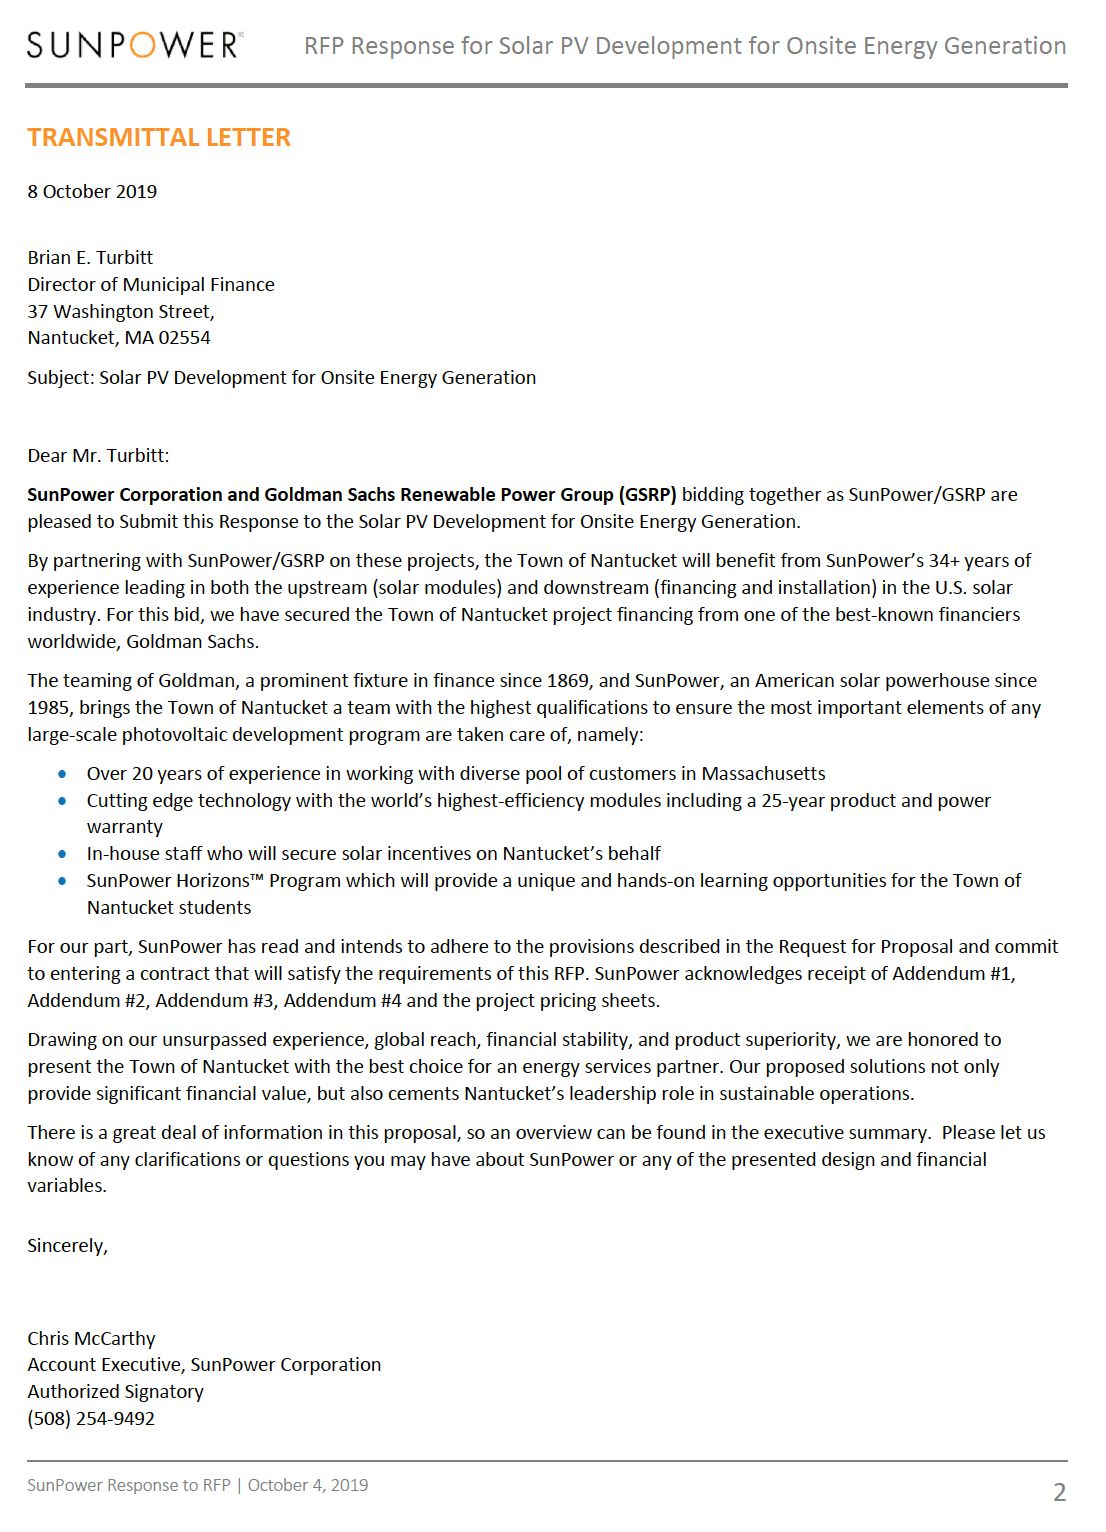 SunPower Bid Proposal Cover Letter Example